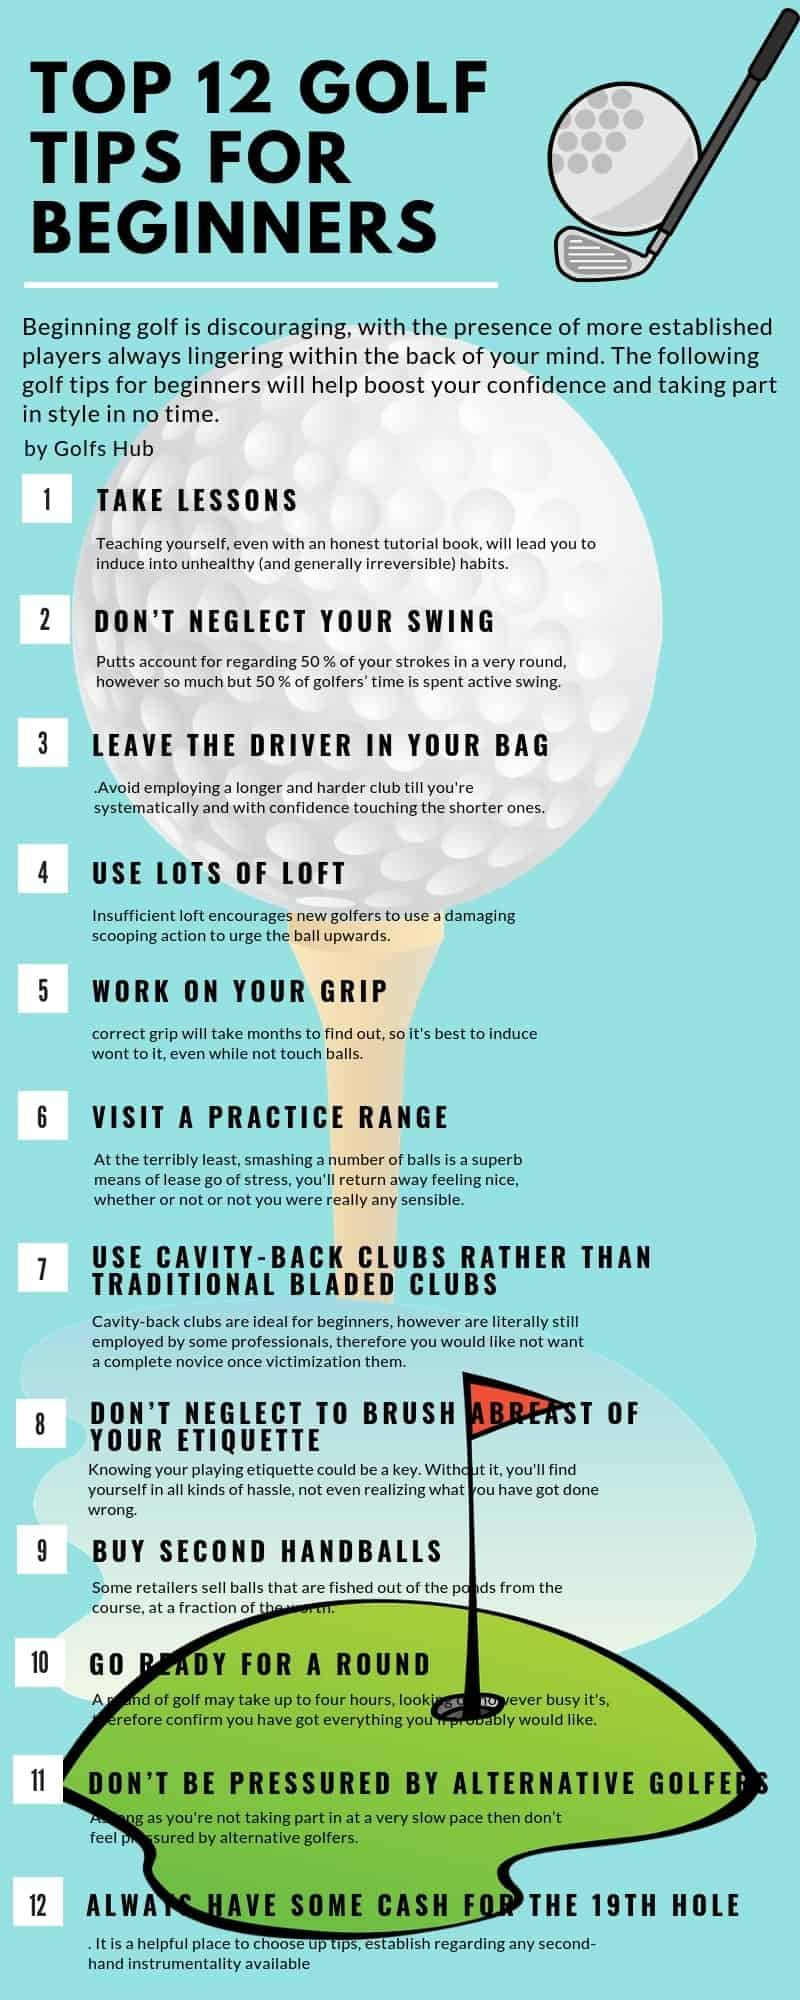 Top 12 Golf Tips for Beginners